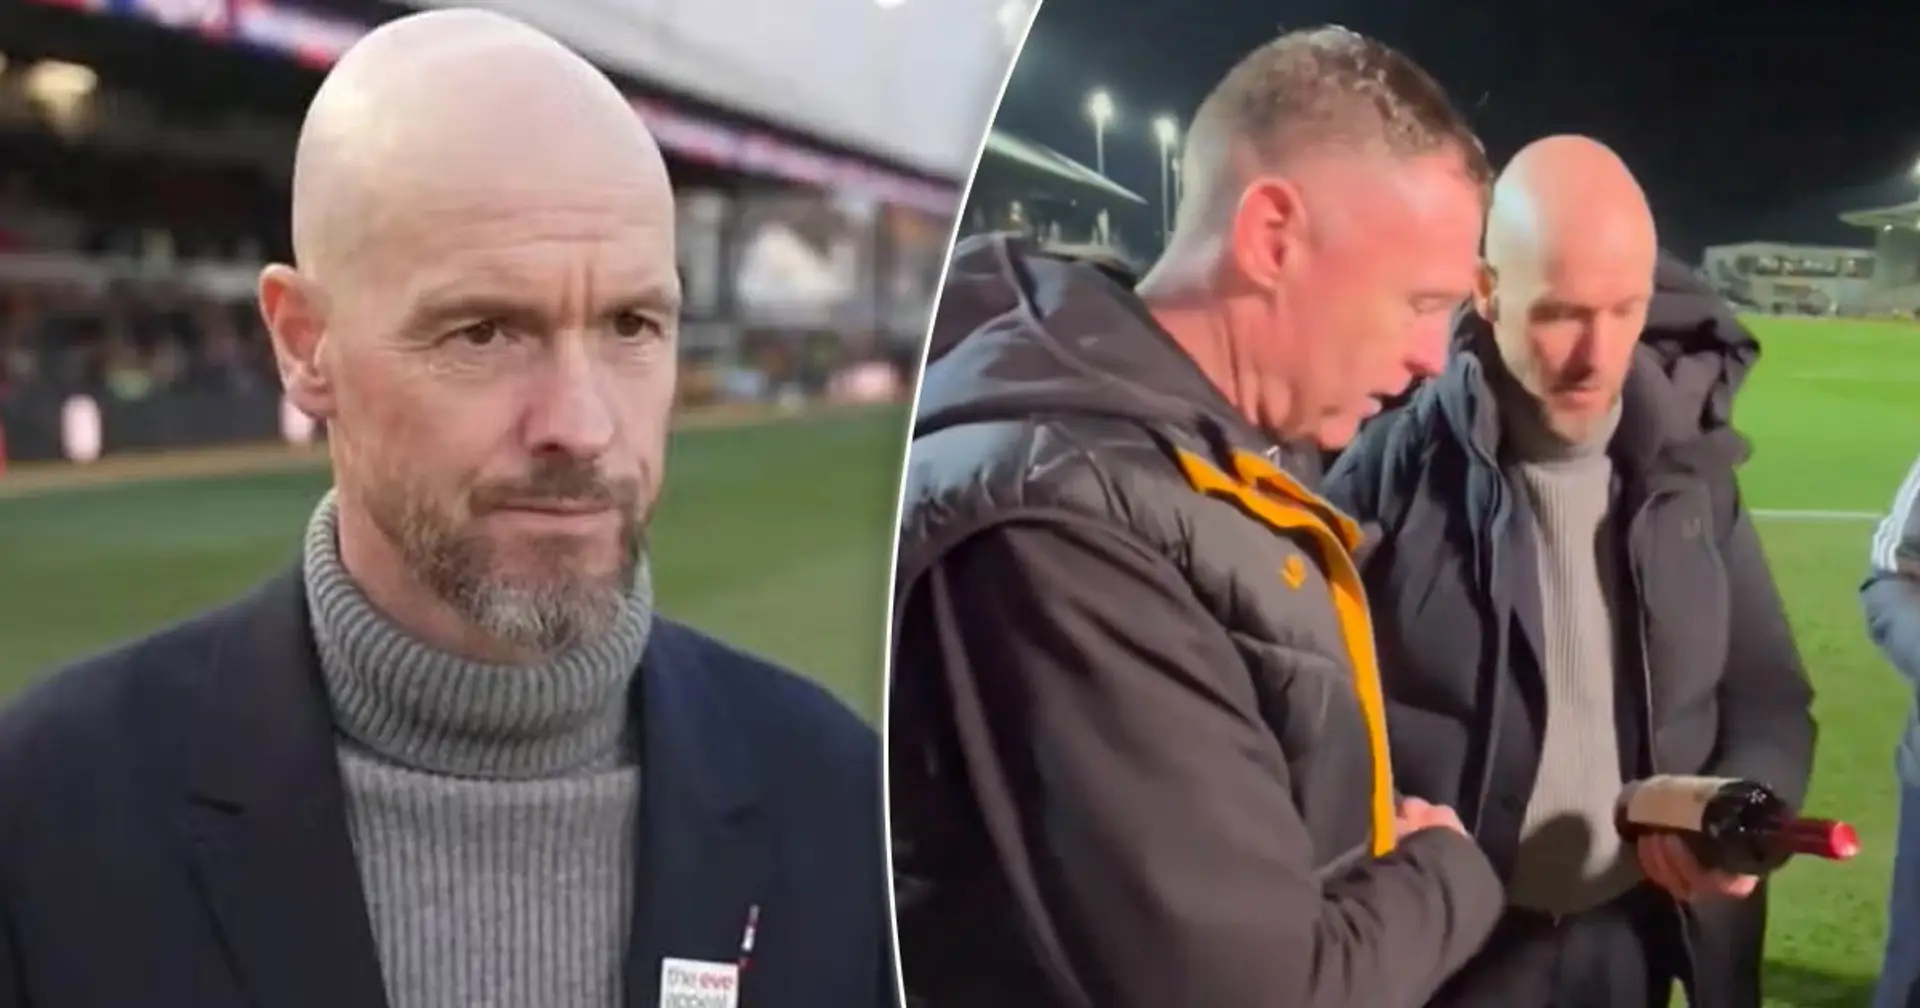 Ten Hag produces classy gesture towards Newport manager after hard-fought win (video)